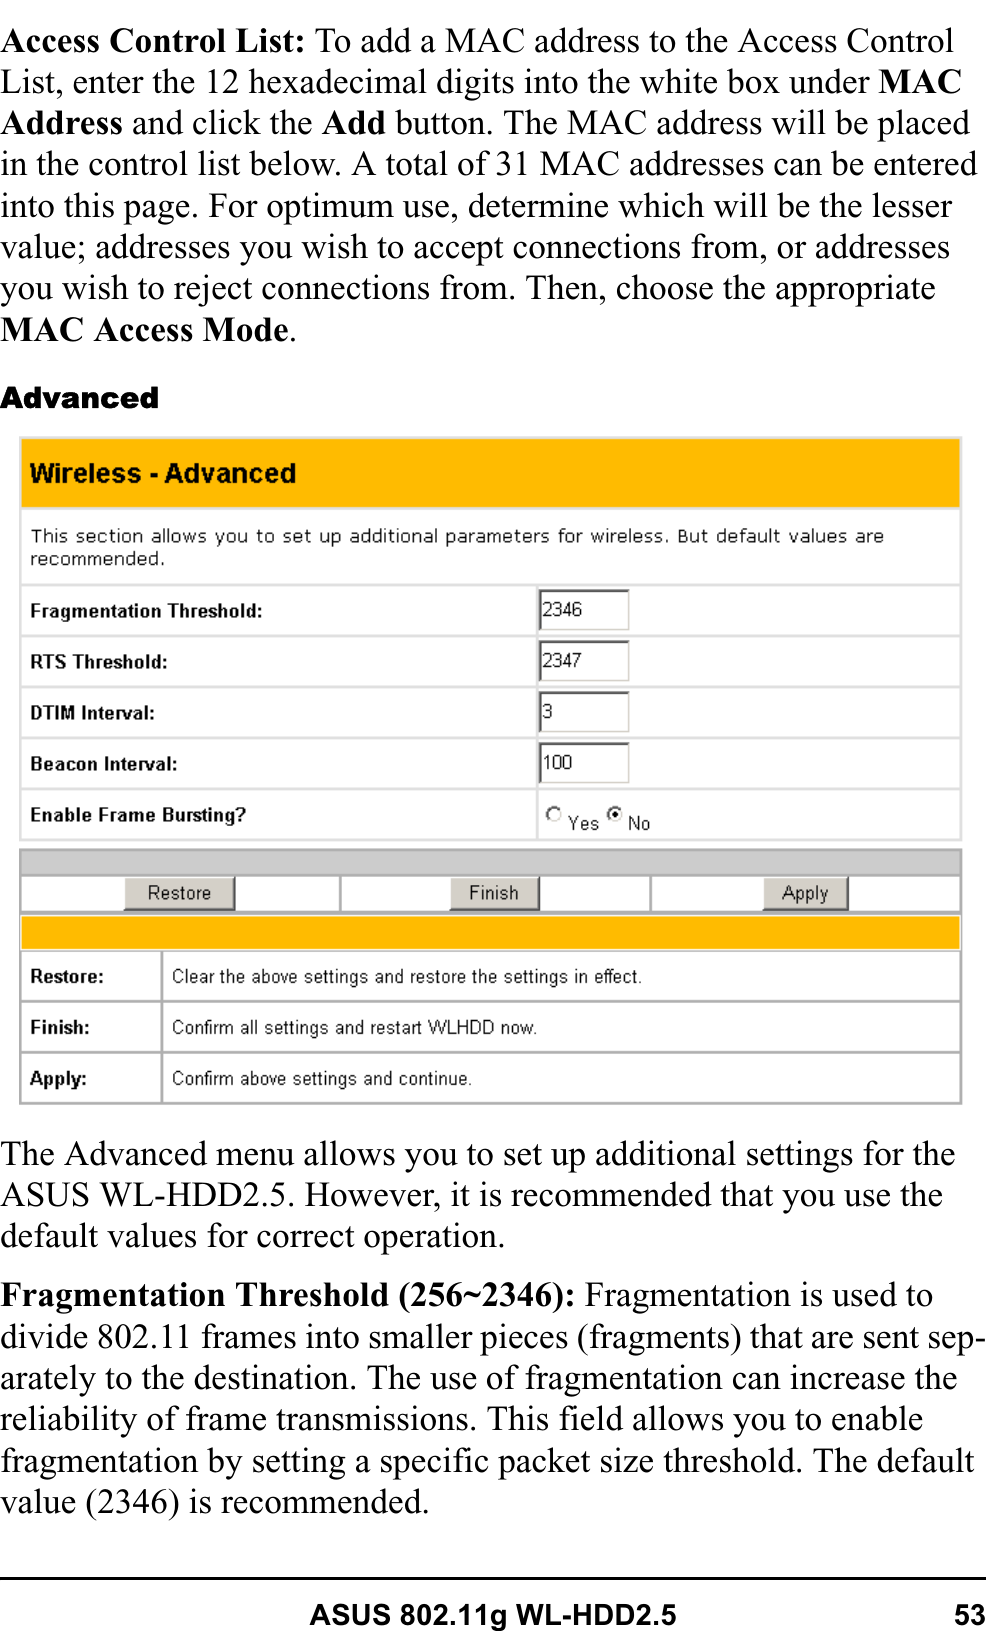 ASUS 802.11g WL-HDD2.5 53Access Control List: To add a MAC address to the Access Control List, enter the 12 hexadecimal digits into the white box under MACAddress and click the Add button. The MAC address will be placed in the control list below. A total of 31 MAC addresses can be entered into this page. For optimum use, determine which will be the lesser value; addresses you wish to accept connections from, or addresses you wish to reject connections from. Then, choose the appropriate MAC Access Mode.AdvancedThe Advanced menu allows you to set up additional settings for the ASUS WL-HDD2.5. However, it is recommended that you use the default values for correct operation.Fragmentation Threshold (256~2346): Fragmentation is used to divide 802.11 frames into smaller pieces (fragments) that are sent sep-arately to the destination. The use of fragmentation can increase the reliability of frame transmissions. This field allows you to enable fragmentation by setting a specific packet size threshold. The default value (2346) is recommended.